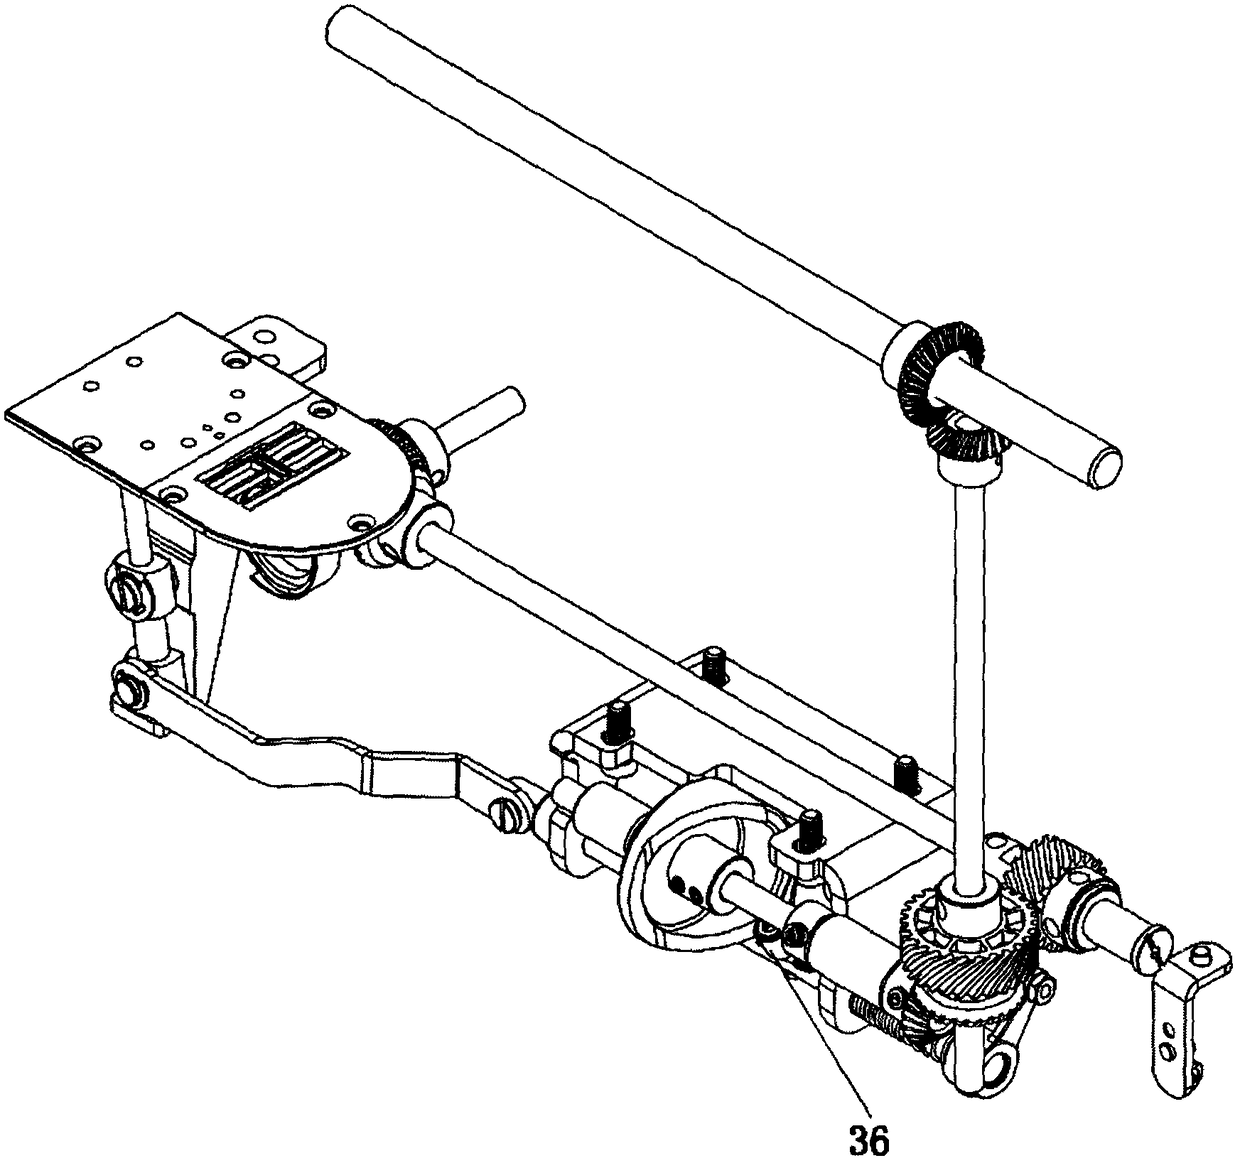 Thread trimming device for zigzagger